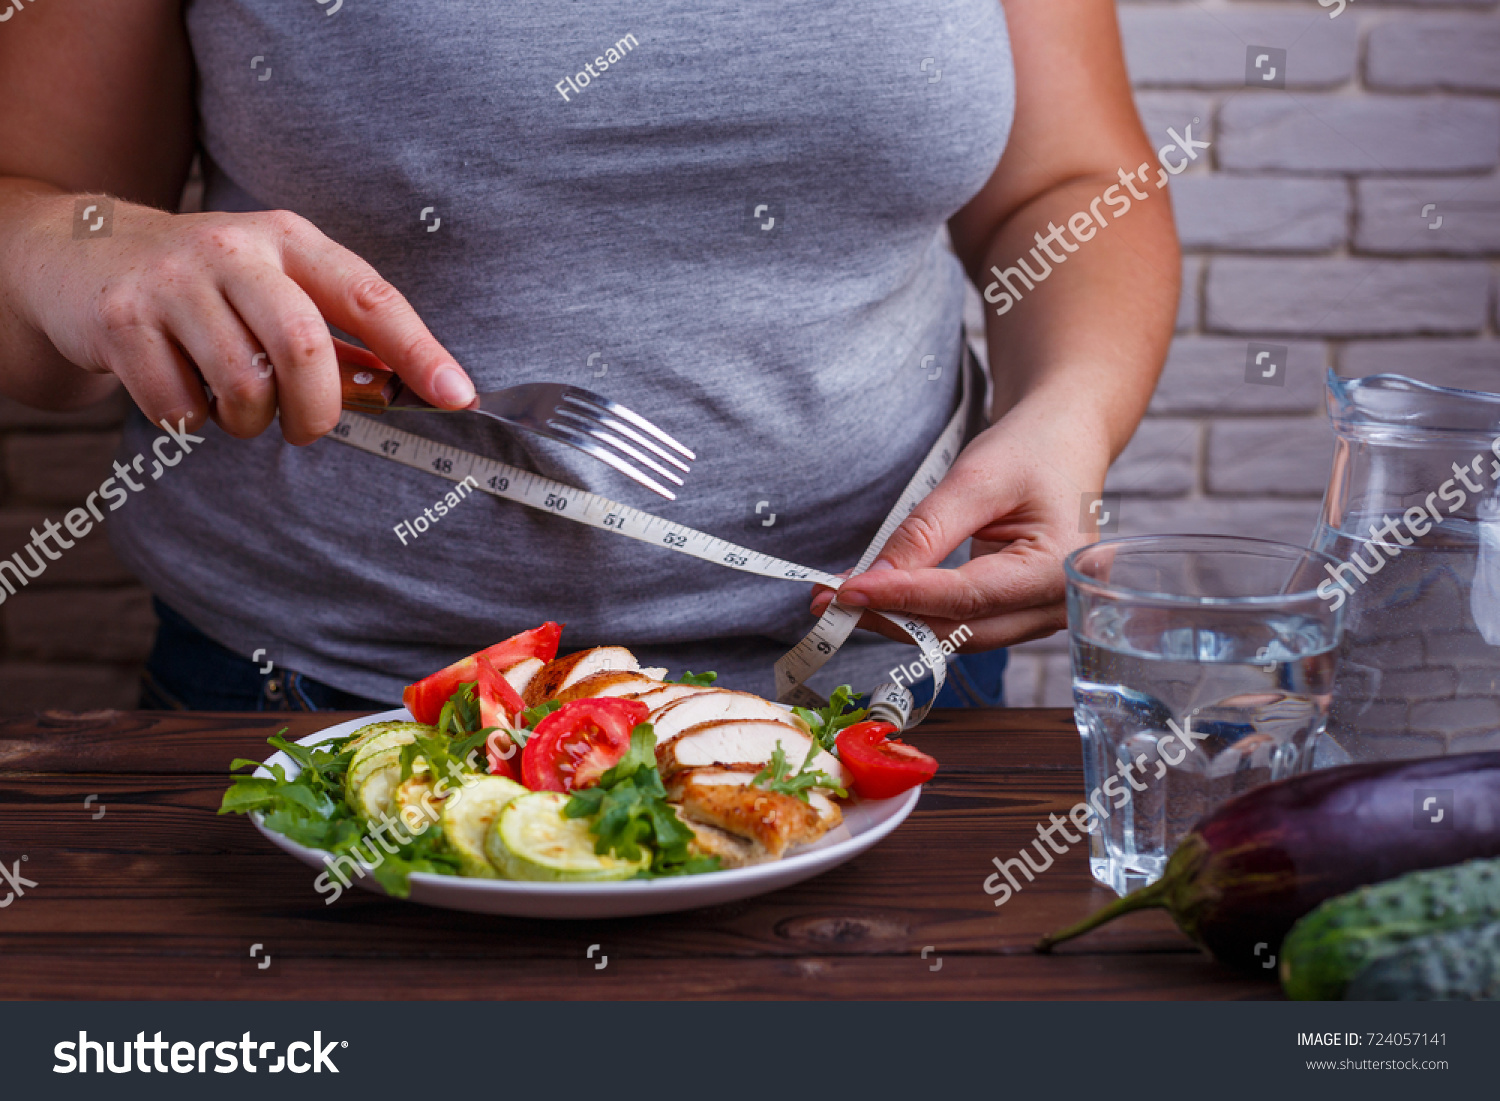 Dieting, healthy low calorie food, weight losing concept. Overweight woman with measuring tape on her waist eating salad from a bowl #724057141